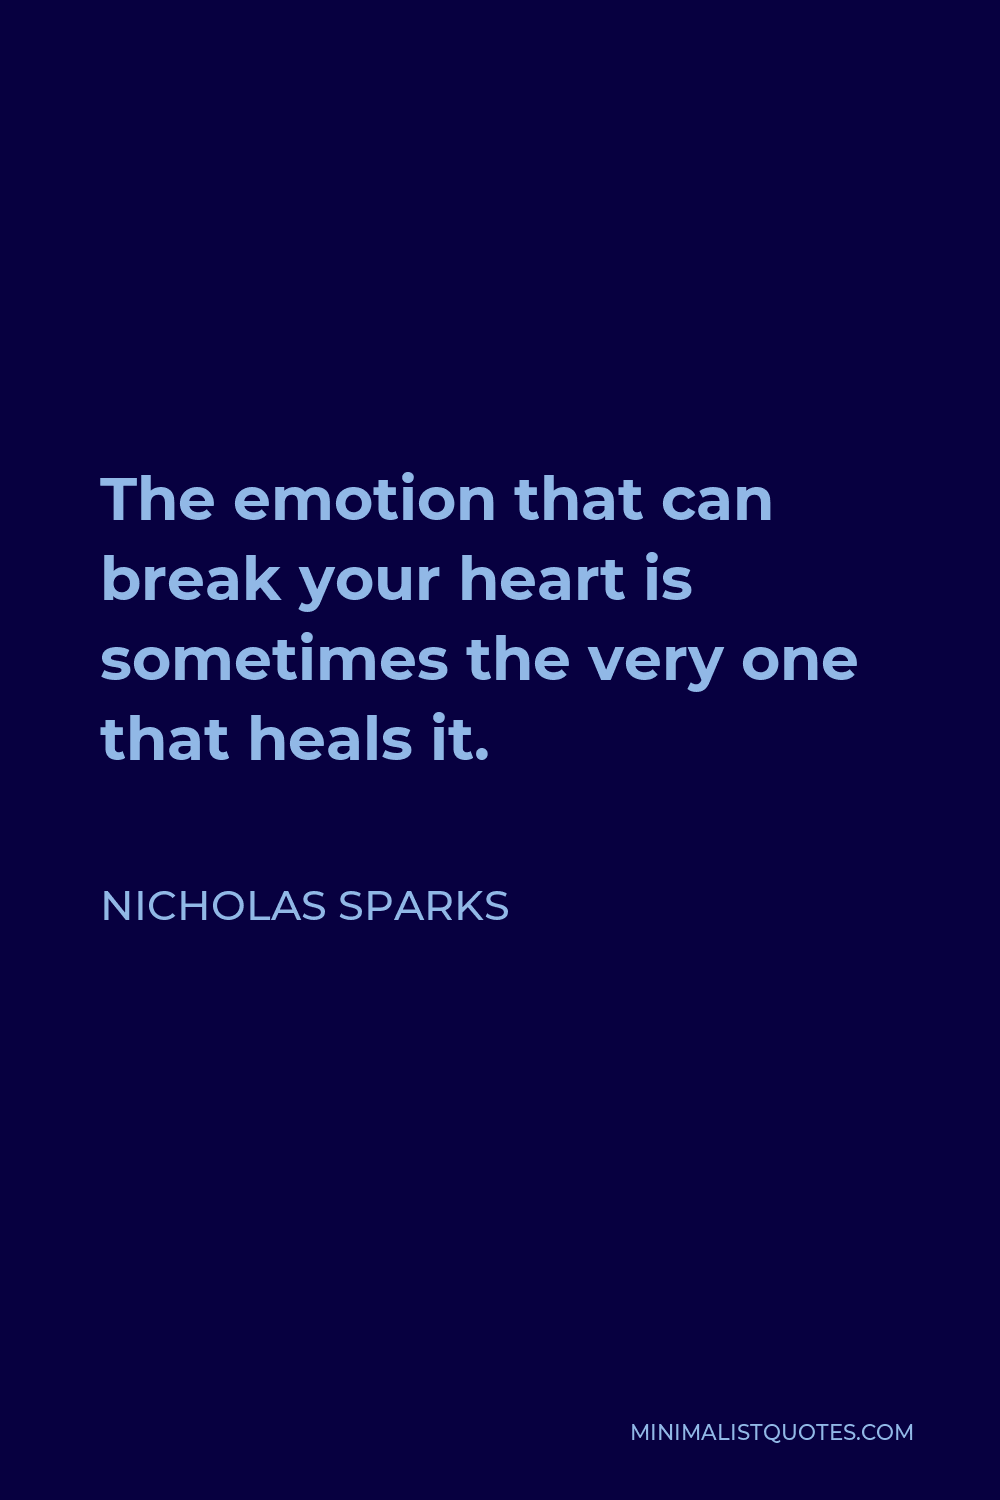 Nicholas Sparks Quote - The emotion that can break your heart is sometimes the very one that heals it.